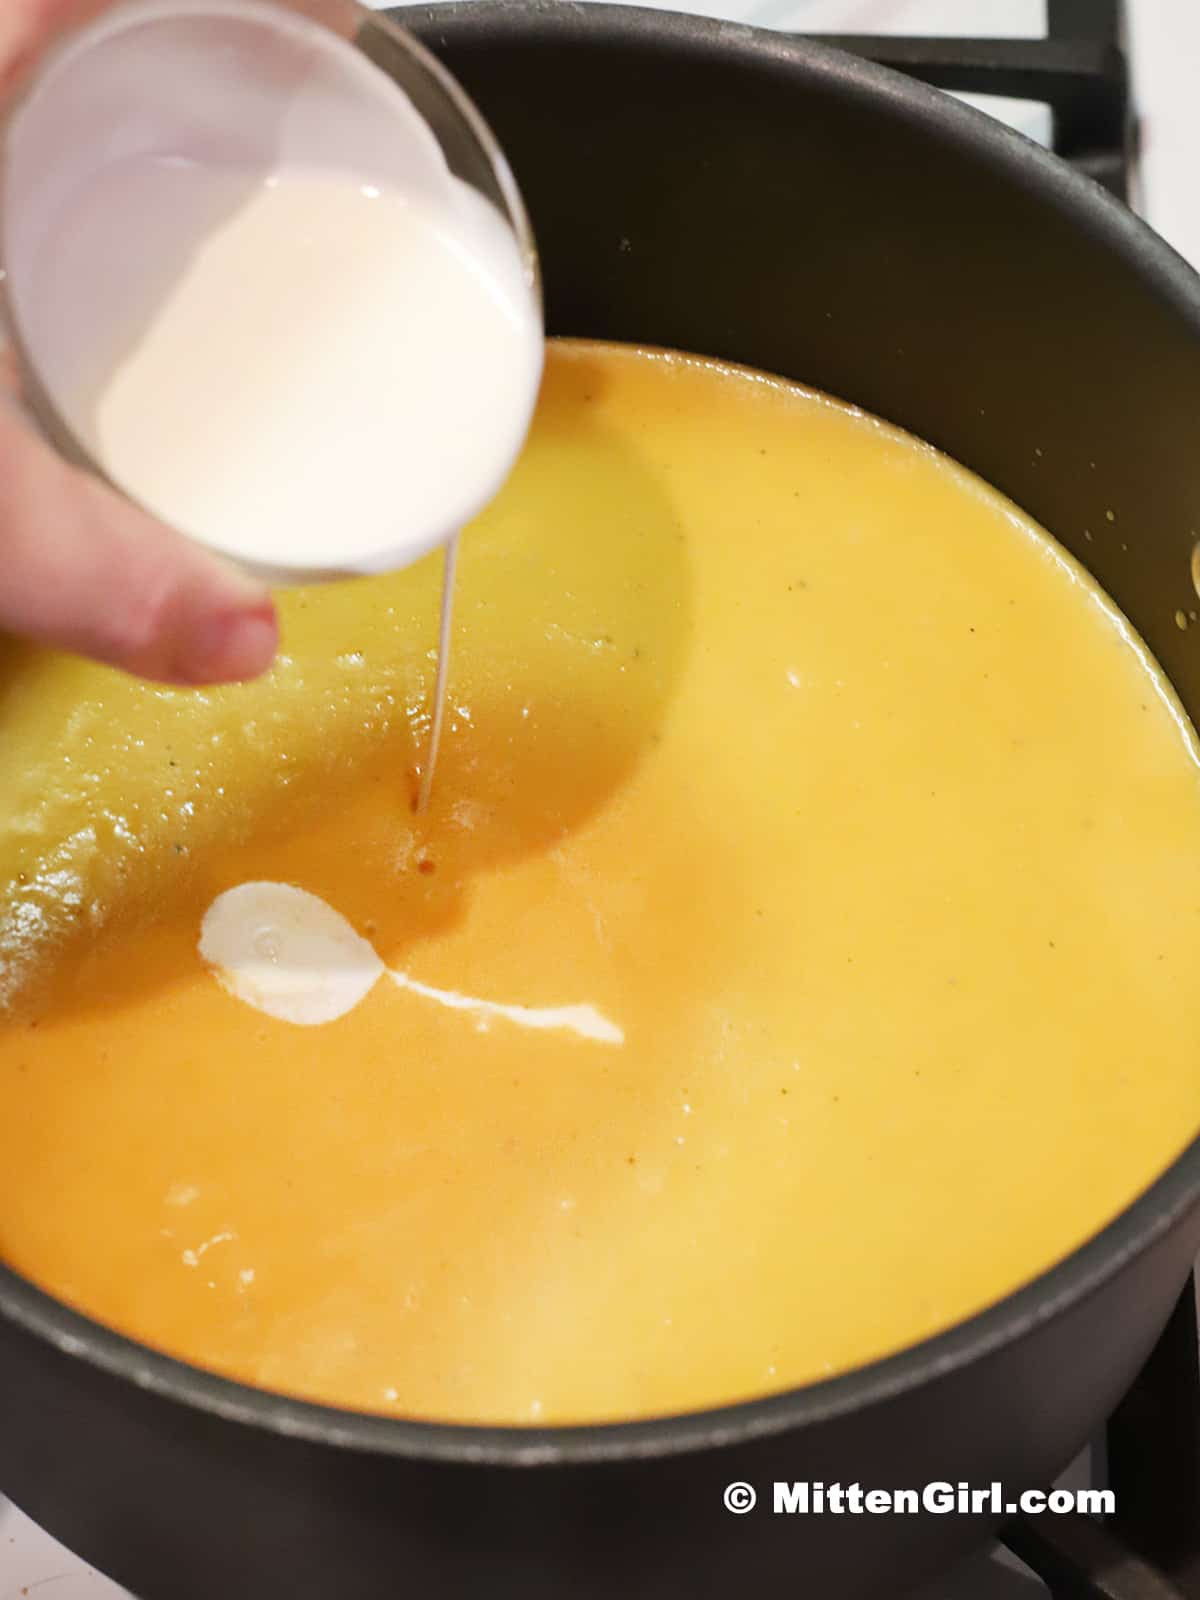 Heavy cream being added to a pot of soup.